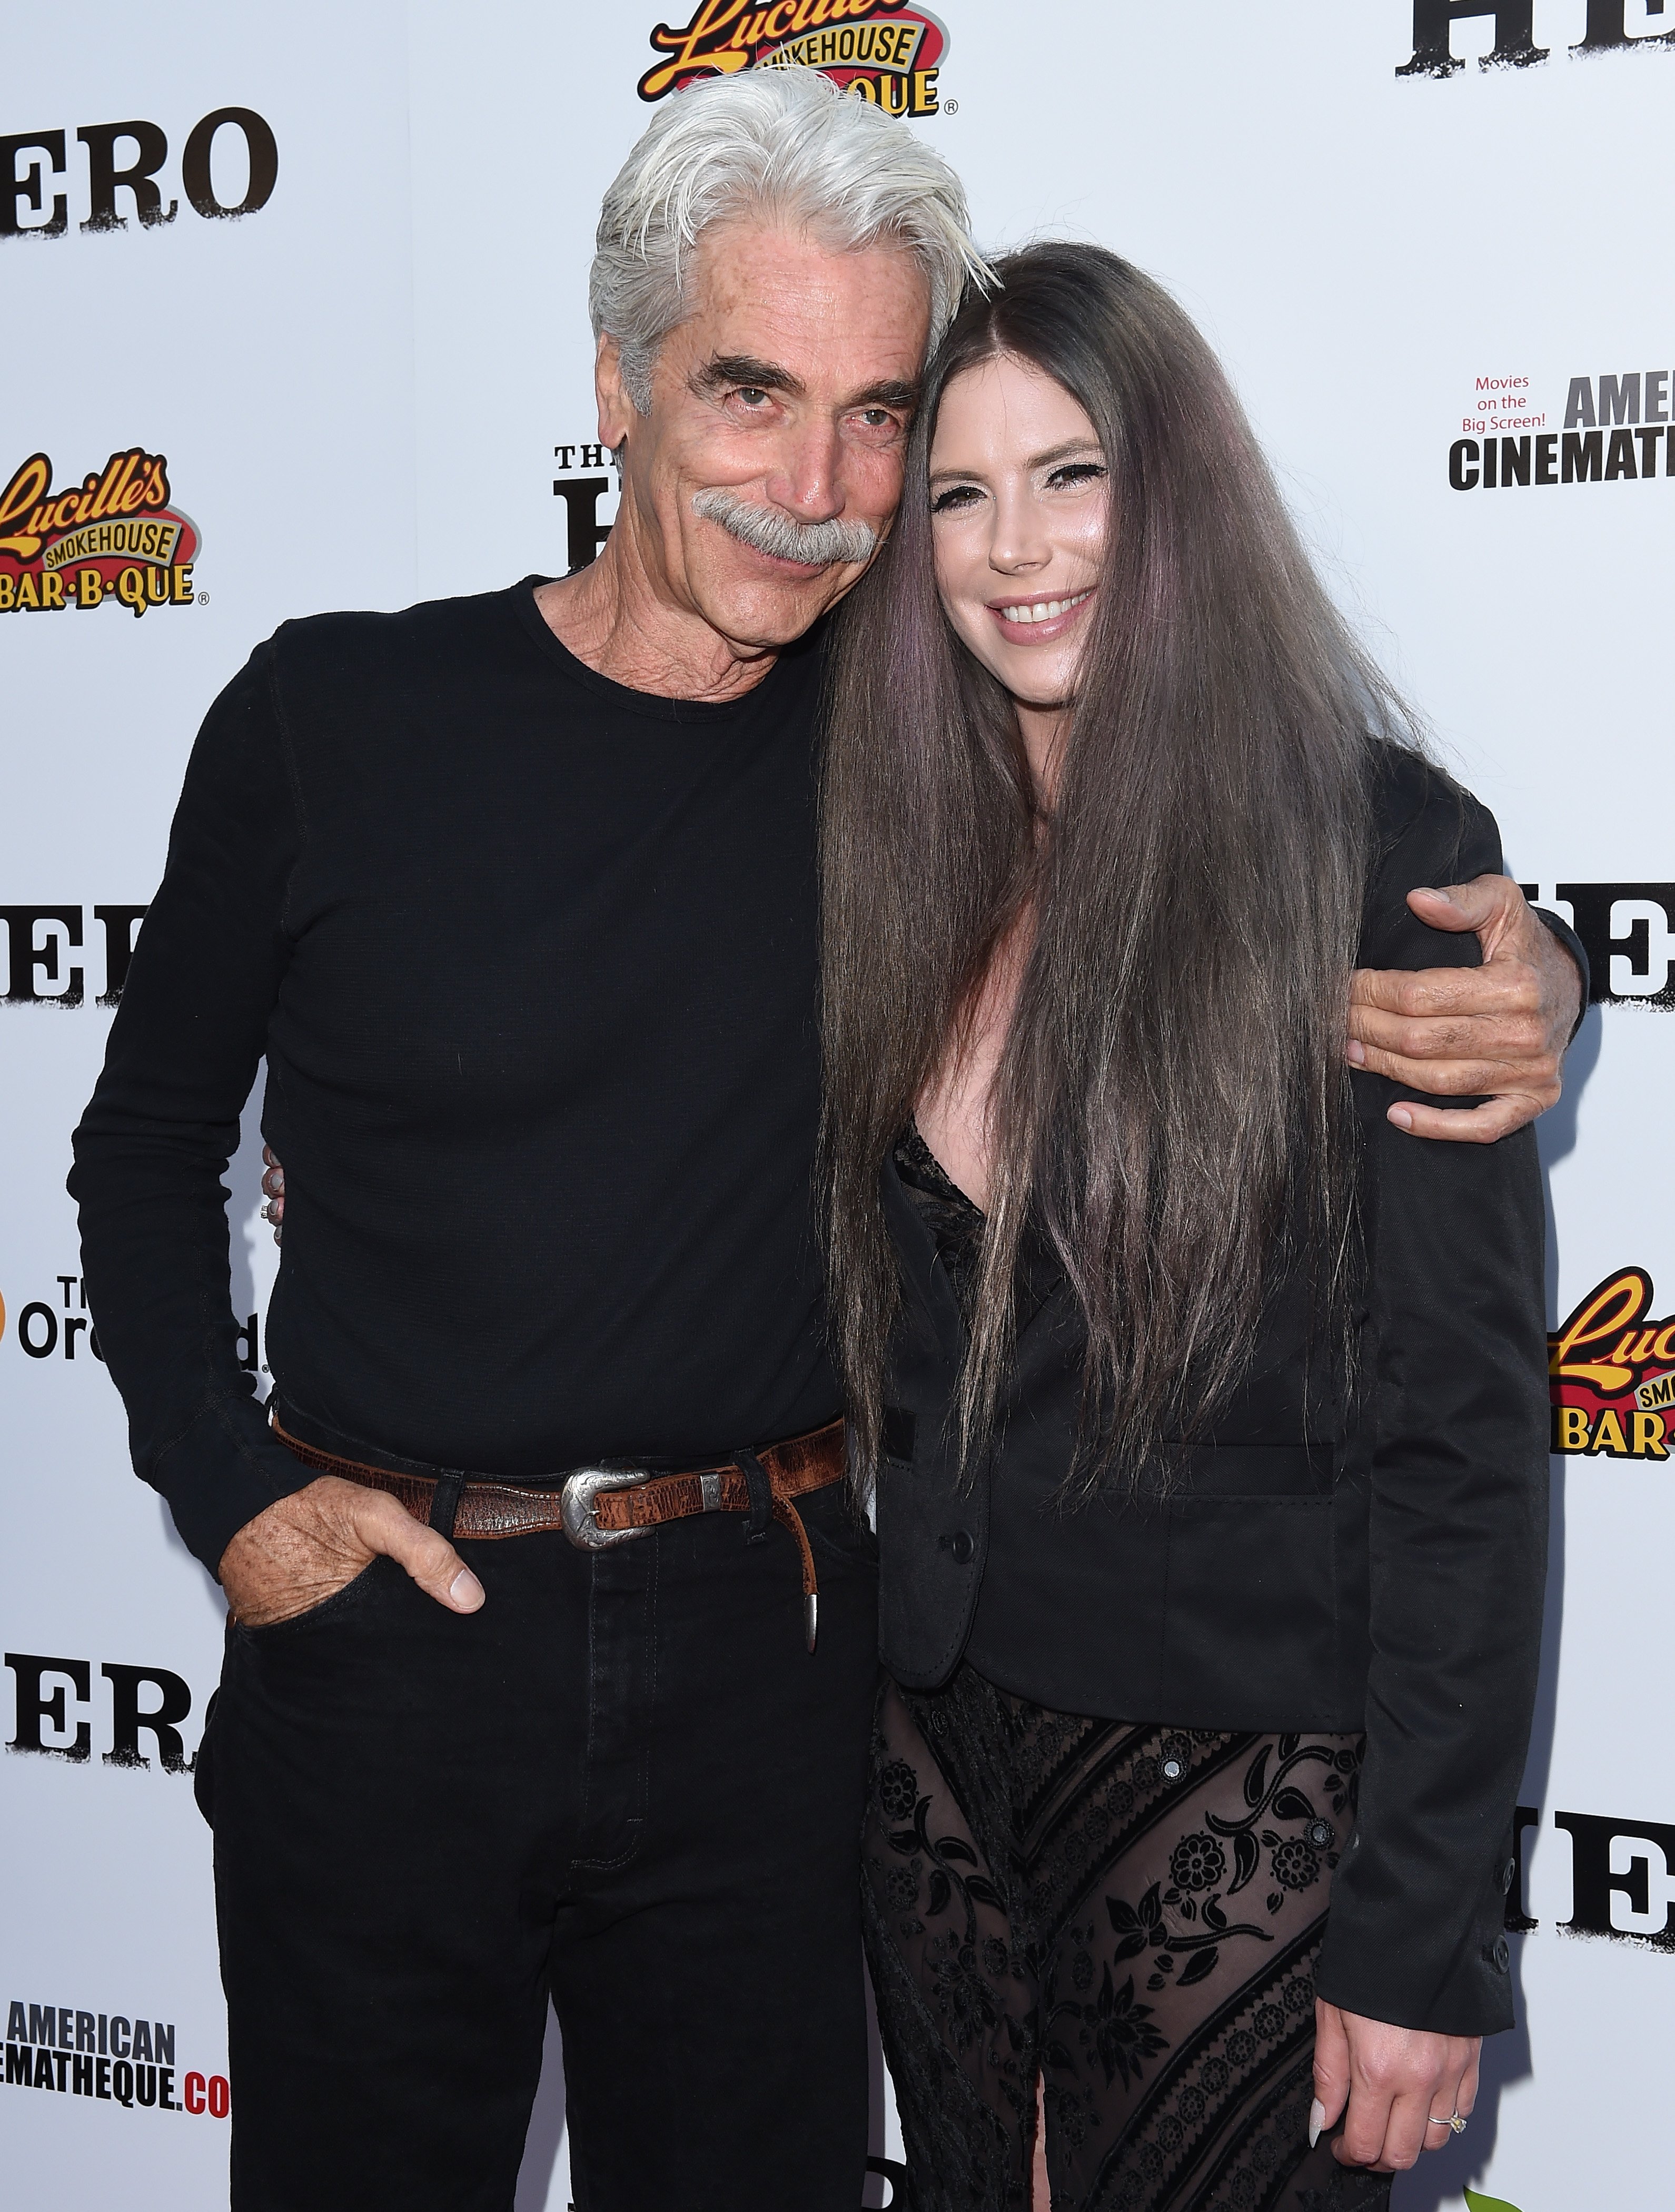 Sam Elliott and his daughter Cleo Rose Elliott at the Los Angeles premiere of "The Hero" June 5, 2017, in Hollywood, California | Source: Getty Images